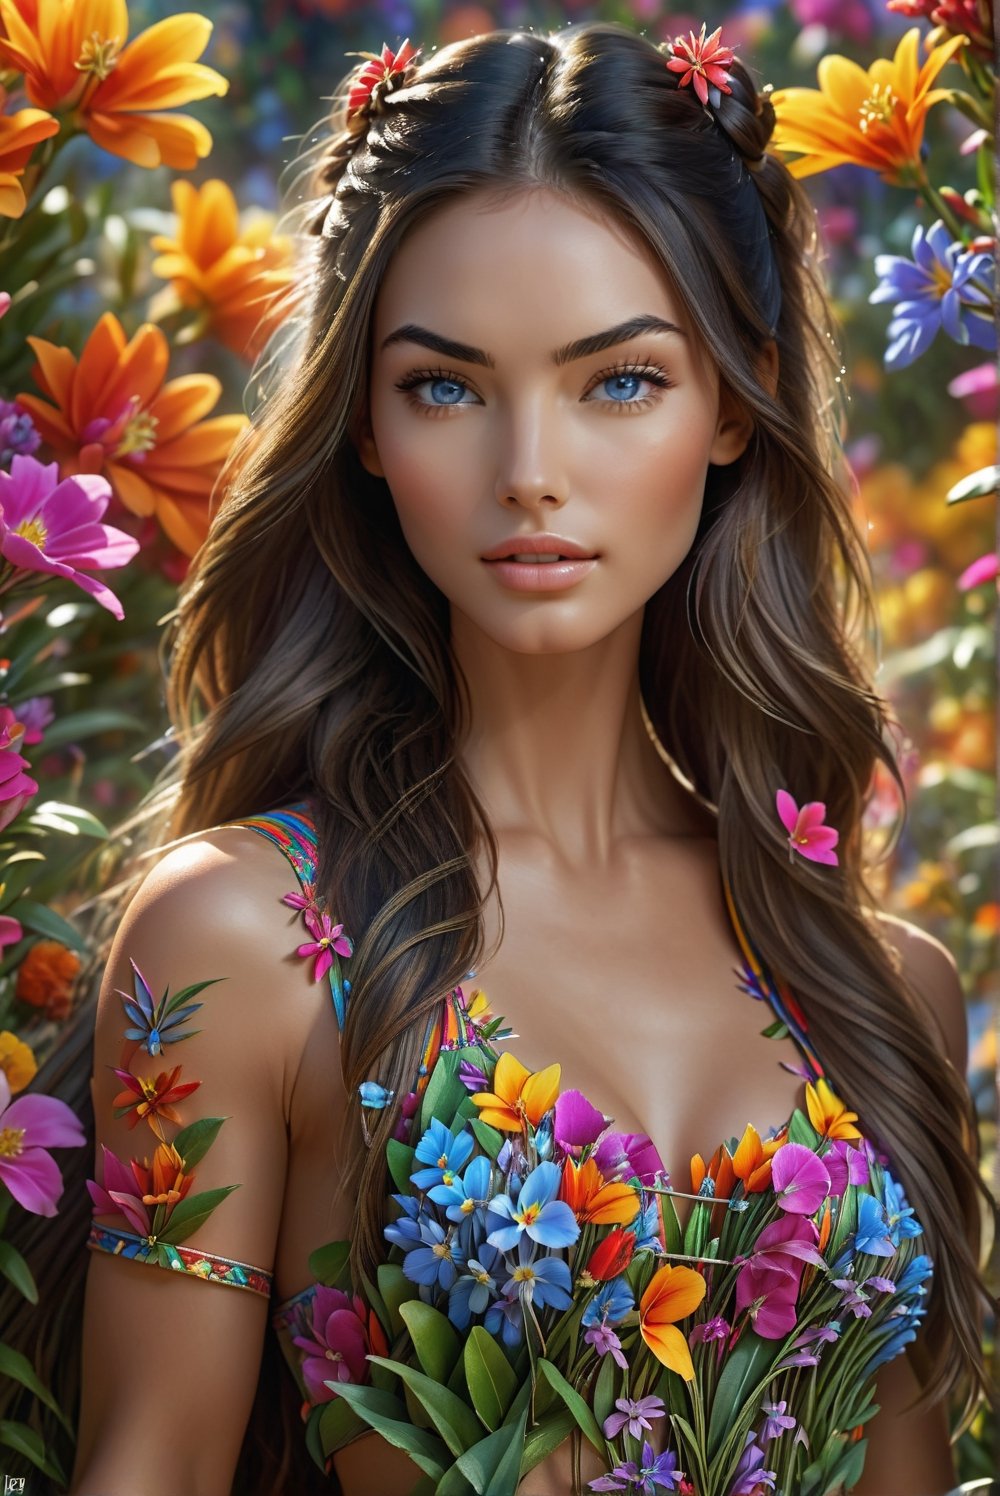 award-winning photo, A beautiful girl, looking like Megan Fox, young woman's sportswear and surrounded by bright colorful flowers, detailed skin, skin pores, magical fantasy, long hair, intricate, sharp focus, highly detailed, 3D, blue eyes, Megan Fox, ral-chrcrts